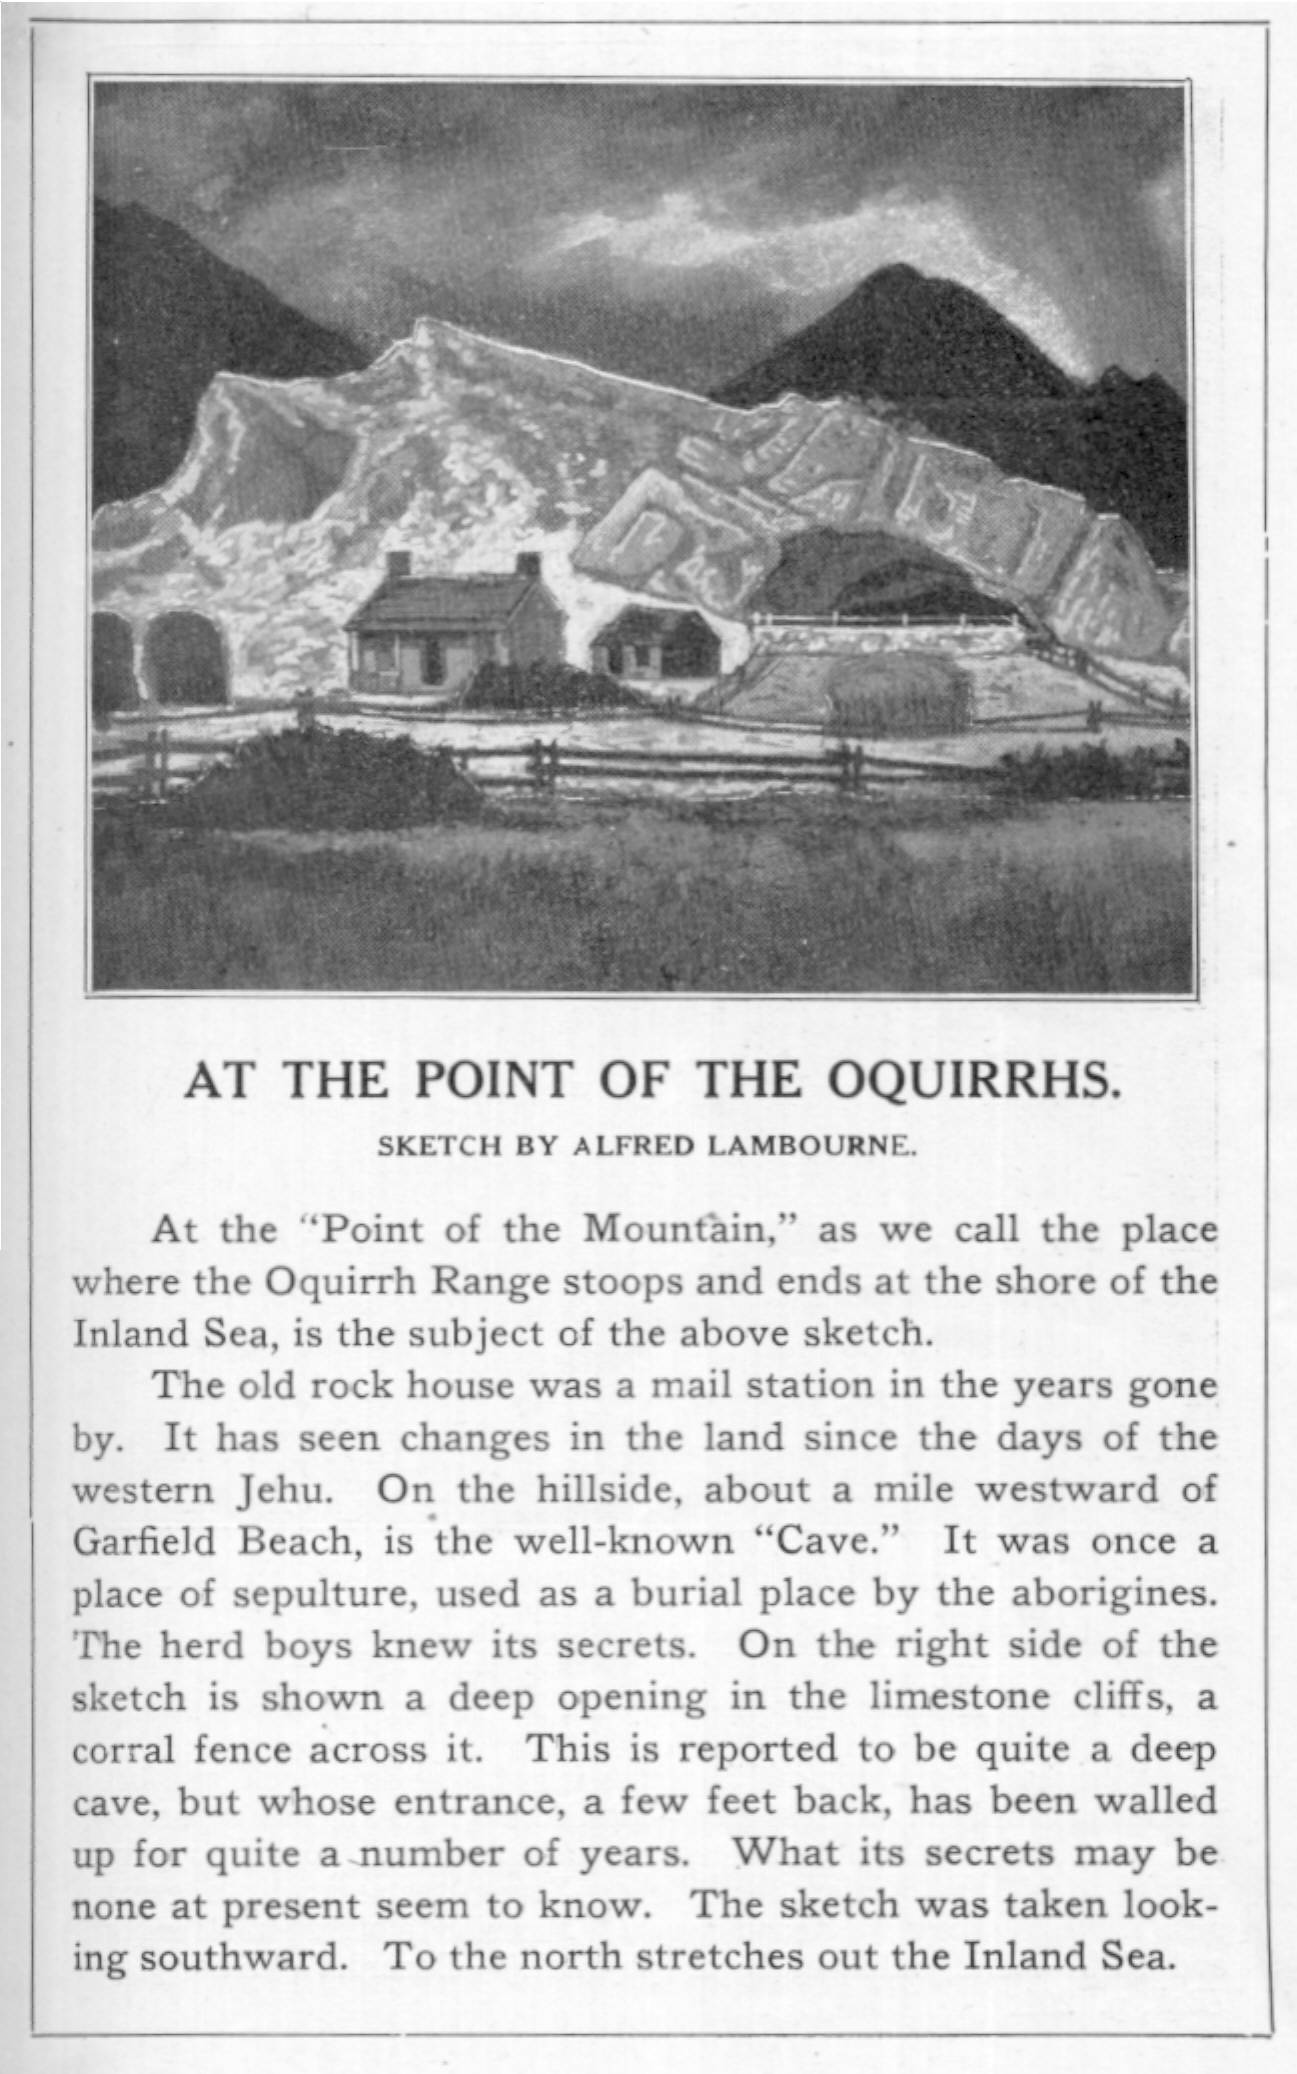 At the Point of the Oquirrhs - by Alfred Lambourne